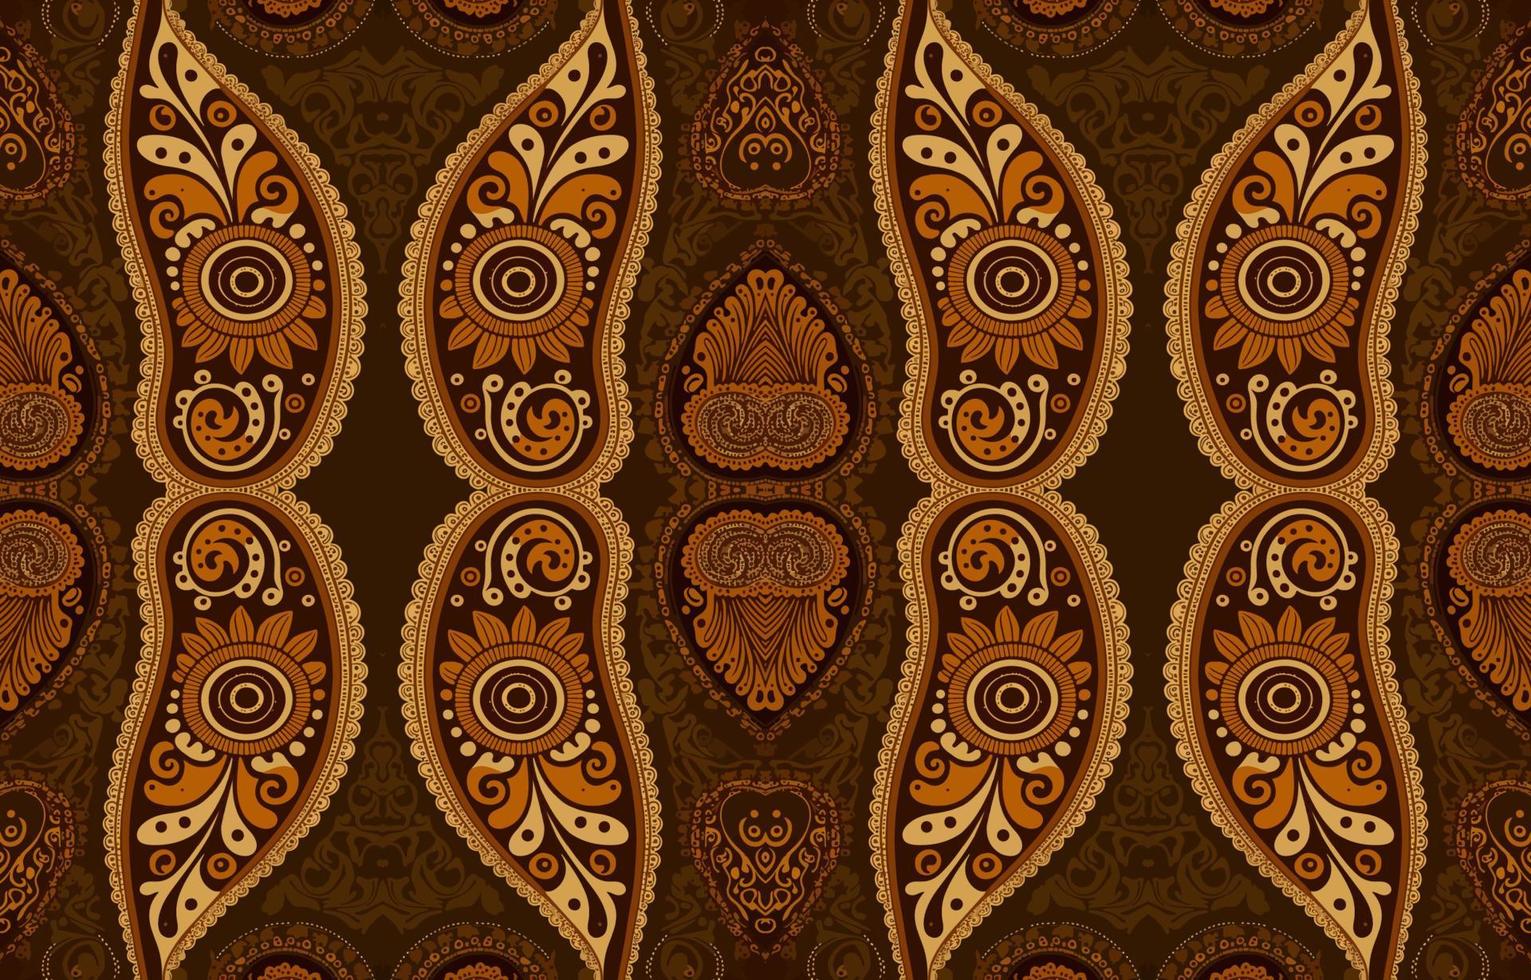 African Ikat paisley seamless pattern brown tone. Abstract traditional folk antique graphic paisley line. Texture textile vector illustration ornate elegant luxury vintage retro style.